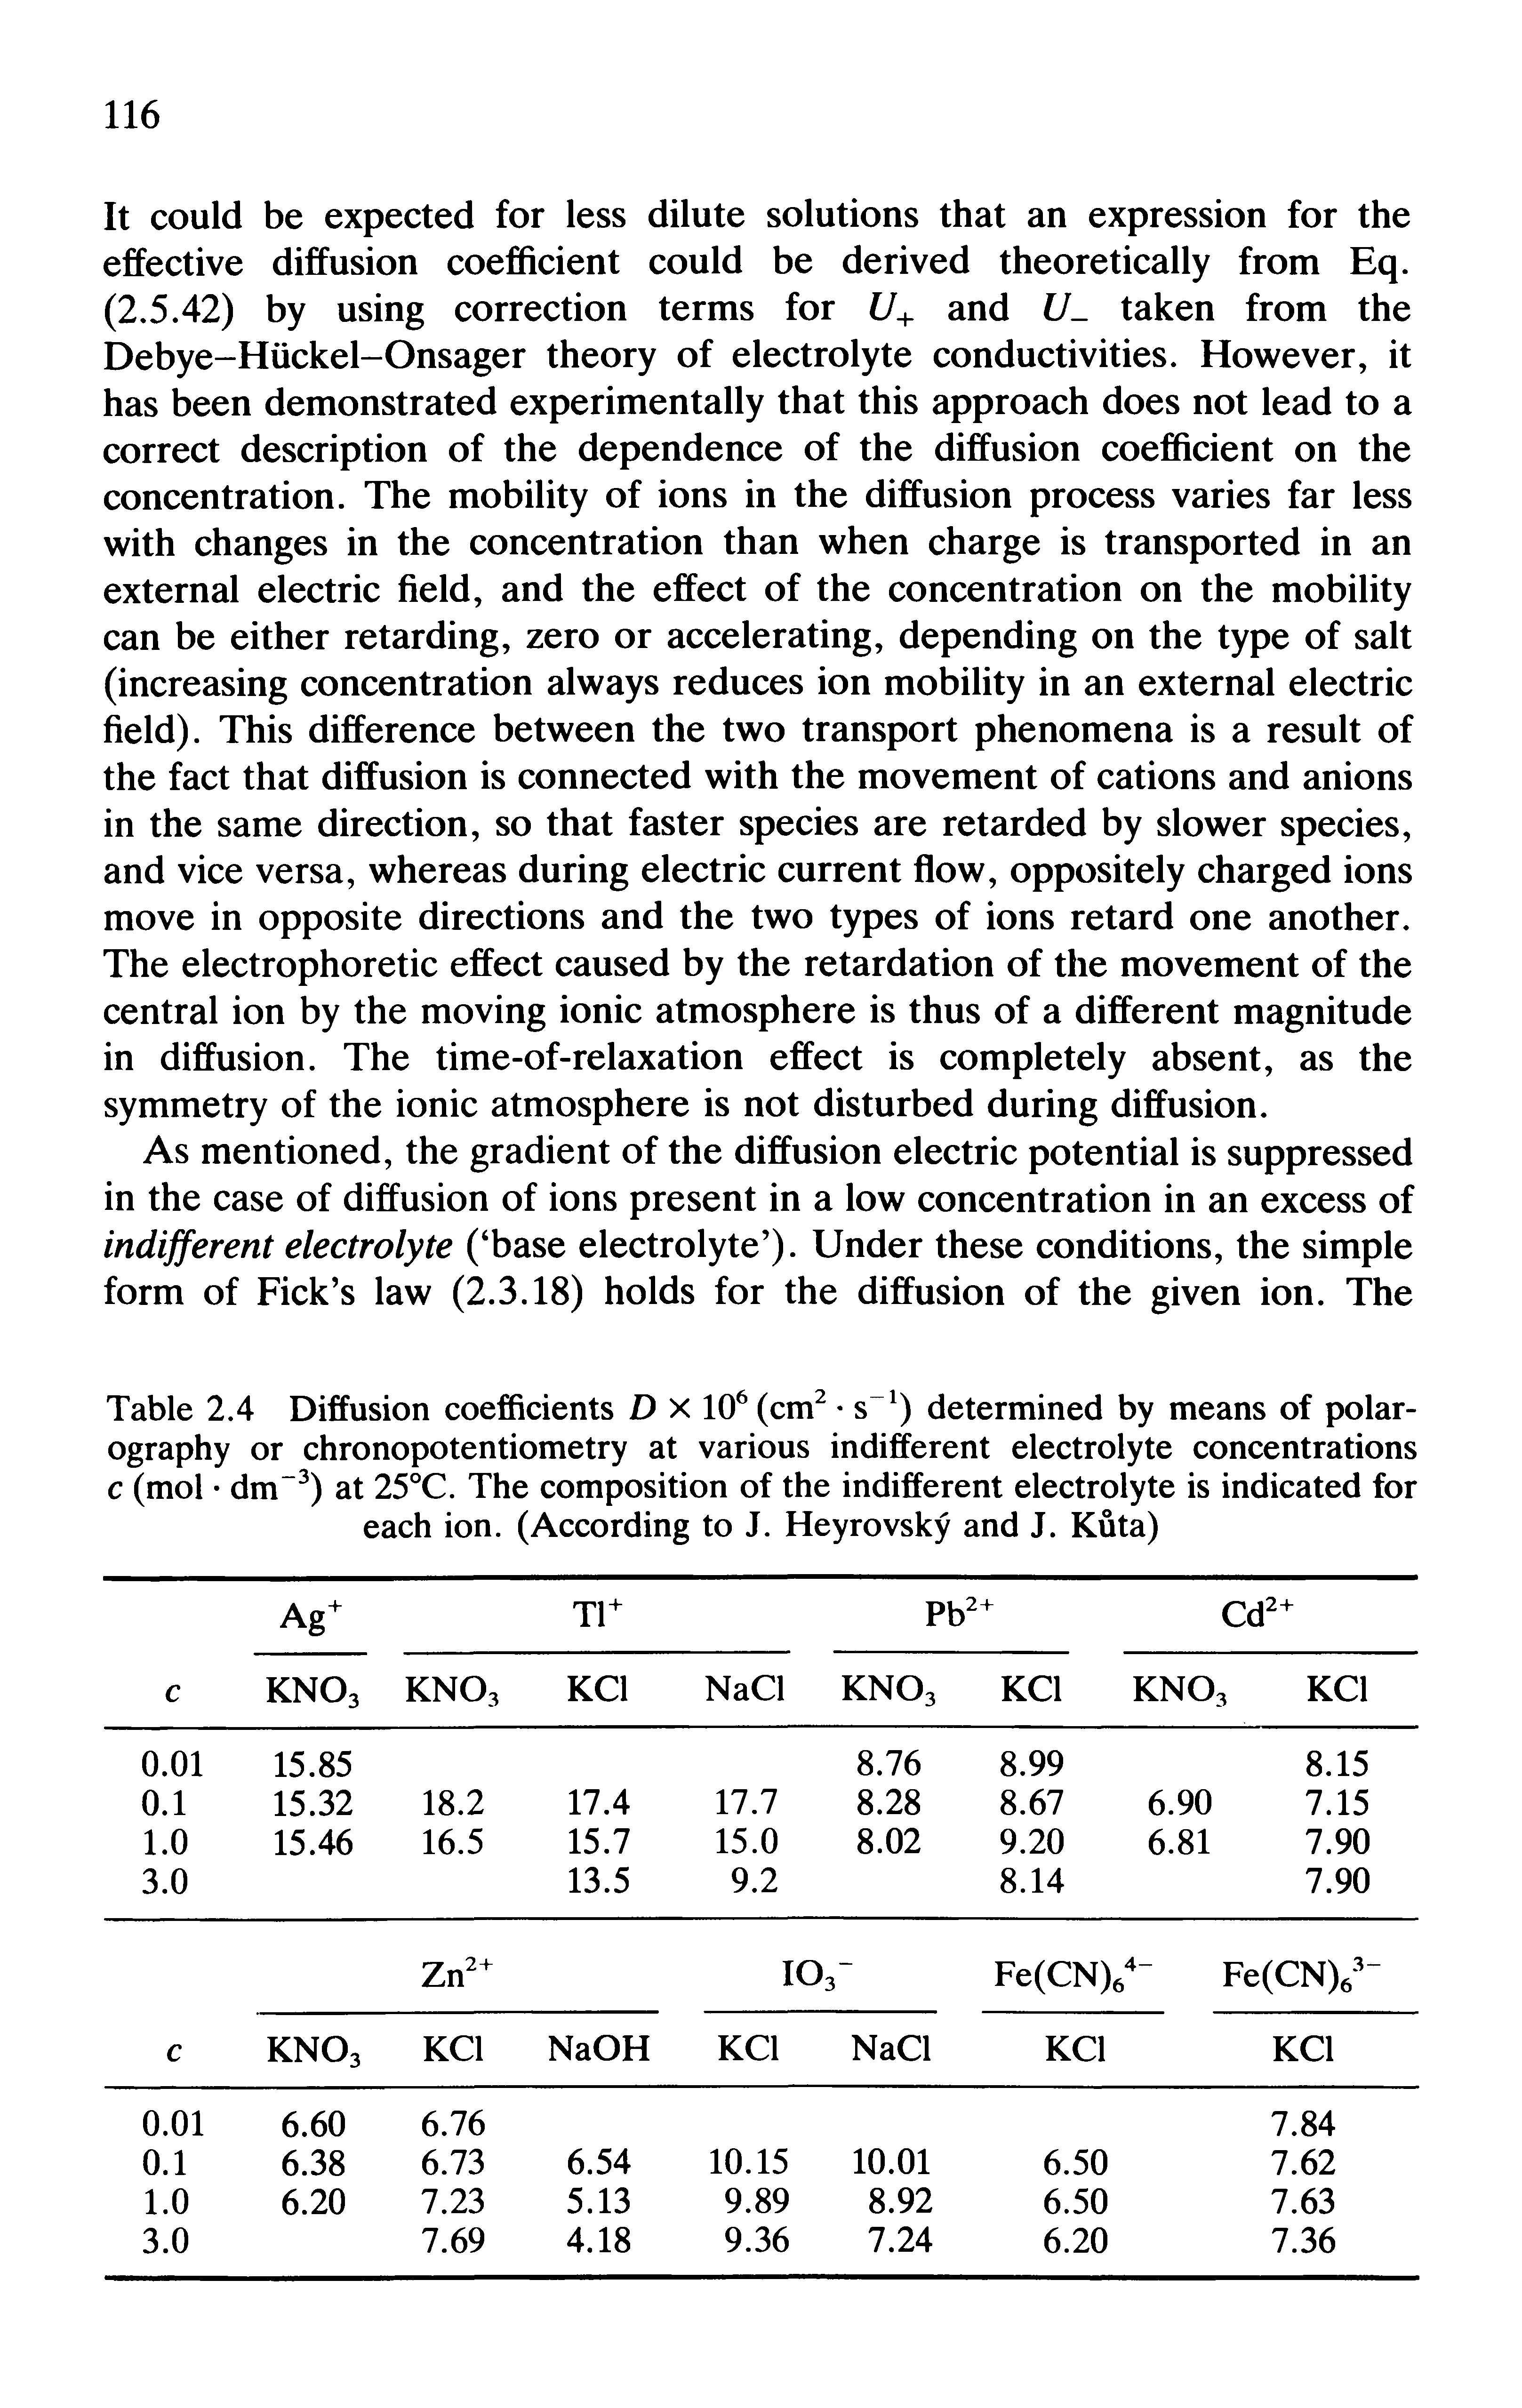 Table 2.4 Diffusion coefficients D x 106 (cm2 s 1) determined by means of polar-ography or chronopotentiometry at various indifferent electrolyte concentrations c (mol dm-3) at 25°C. The composition of the indifferent electrolyte is indicated for each ion. (According to J. Heyrovsky and J. Kuta)...